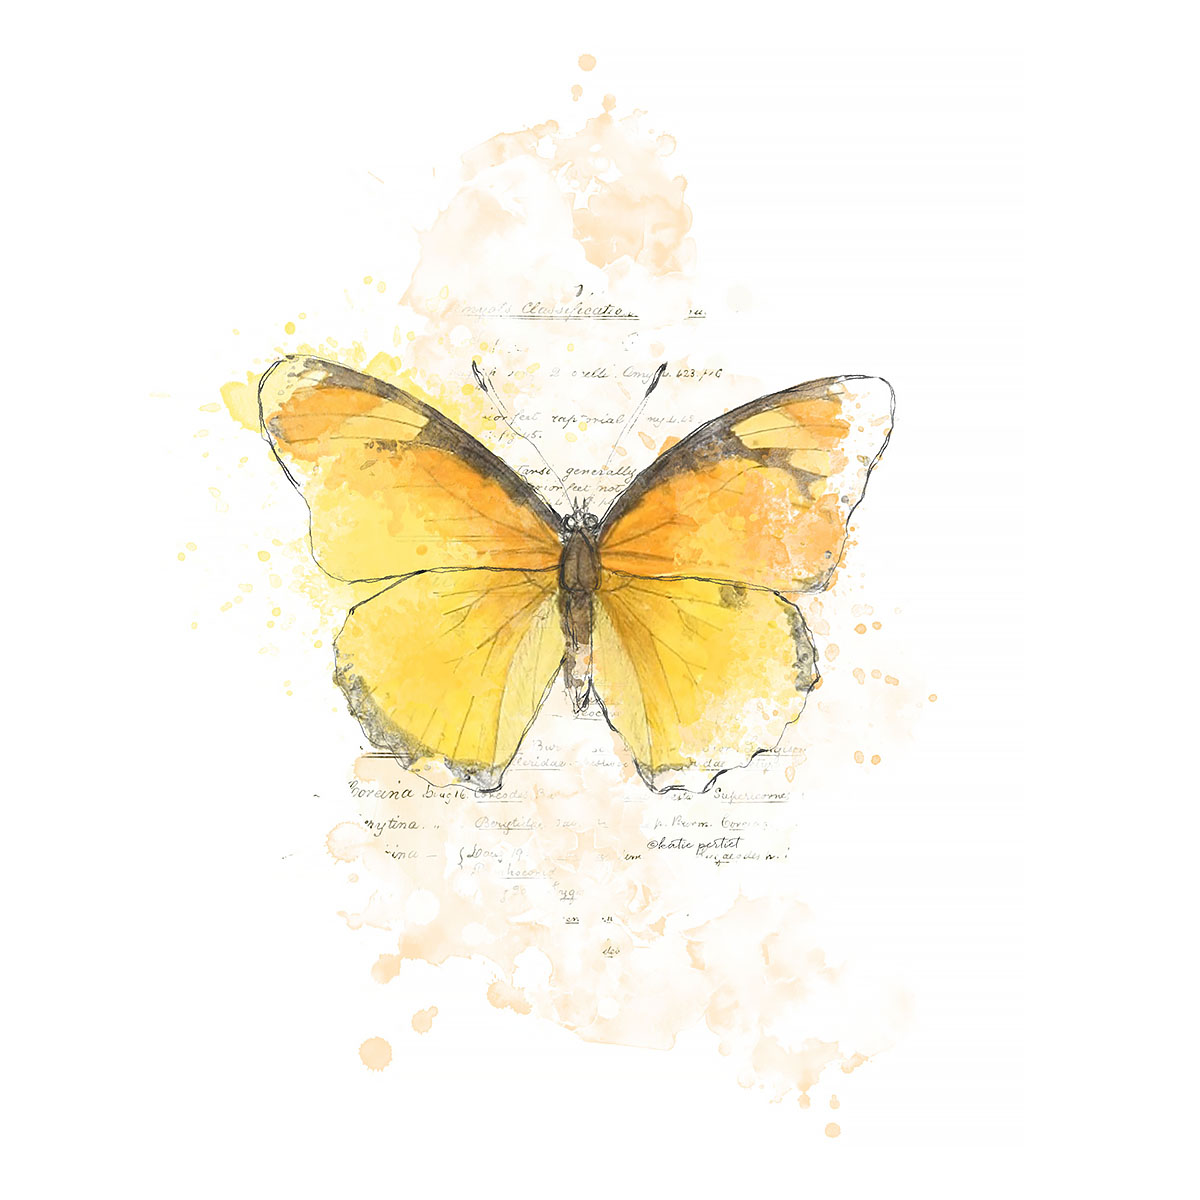 Katie Pertiet Painted Butterfly